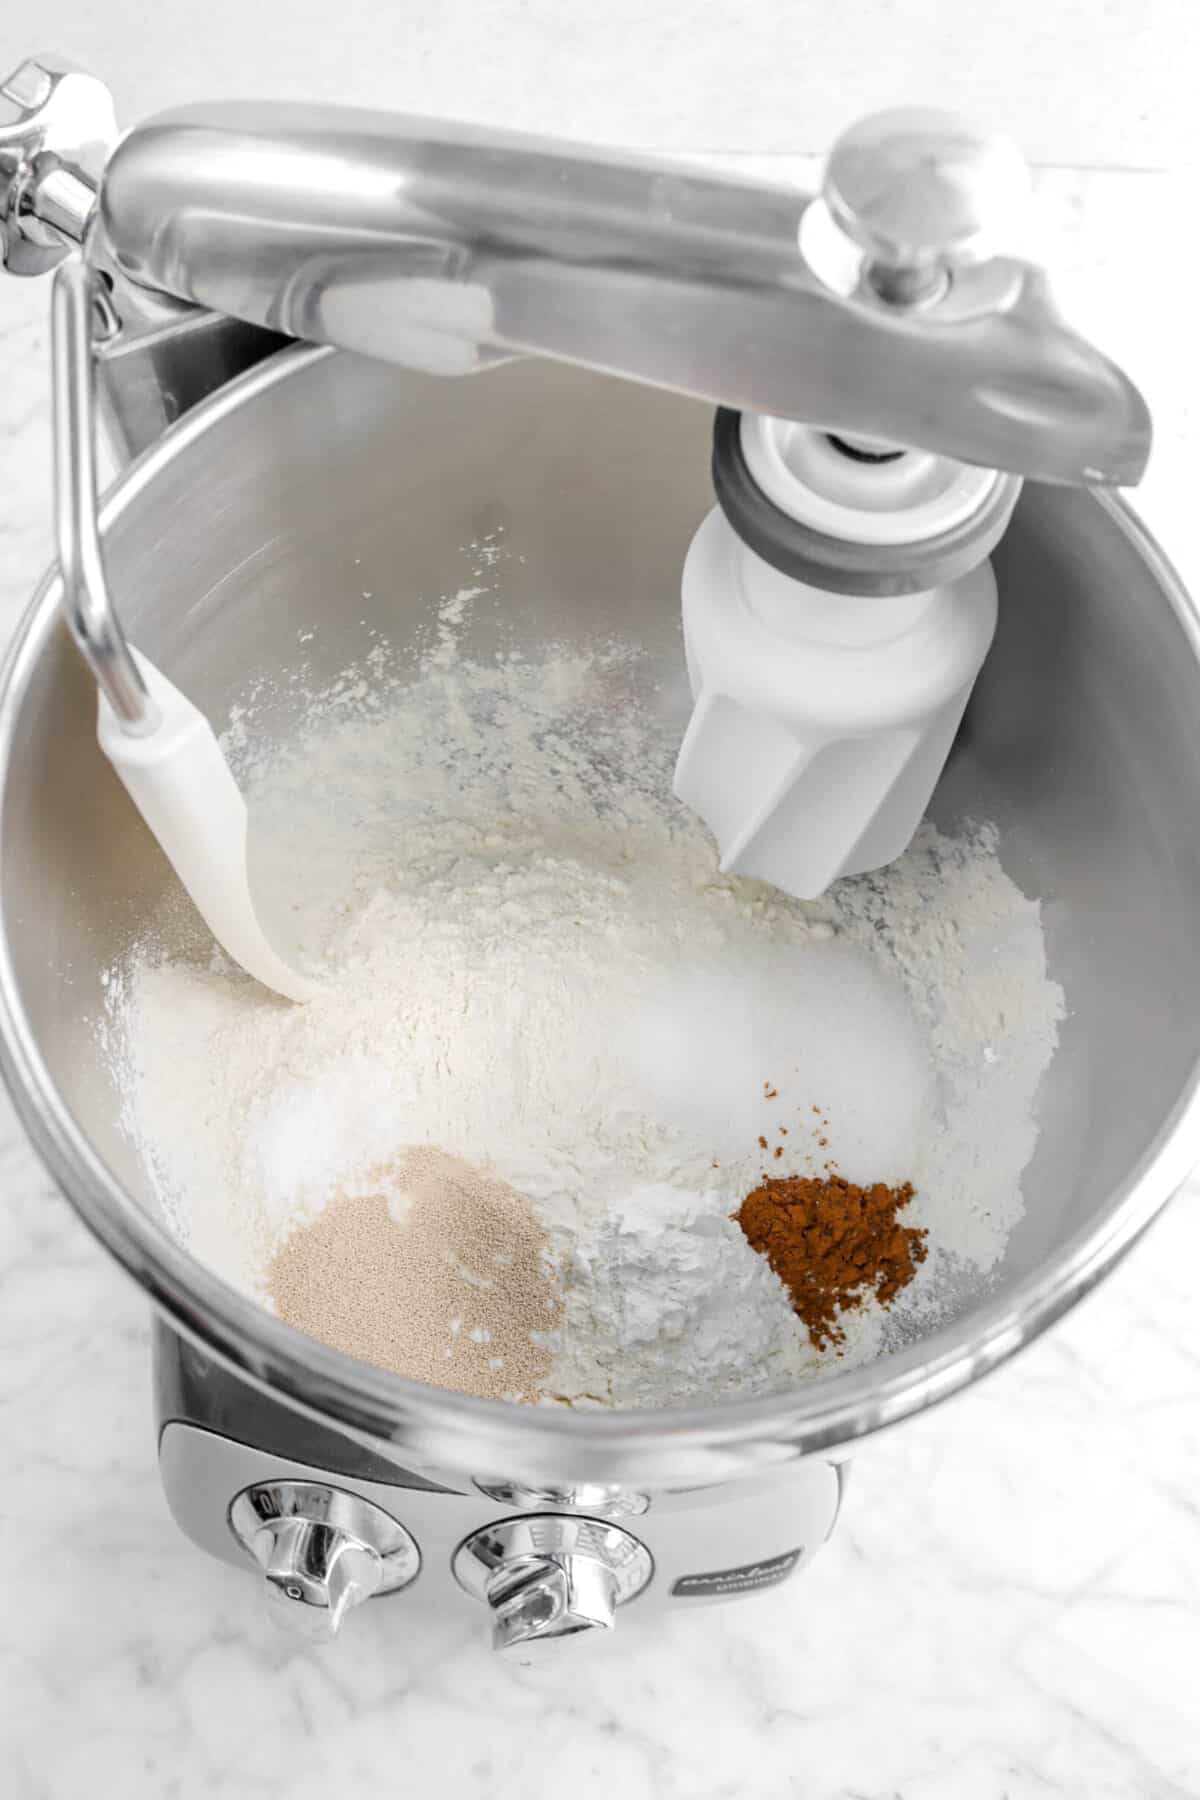 flour, spices, yeast, salt, and sugar in a mixer